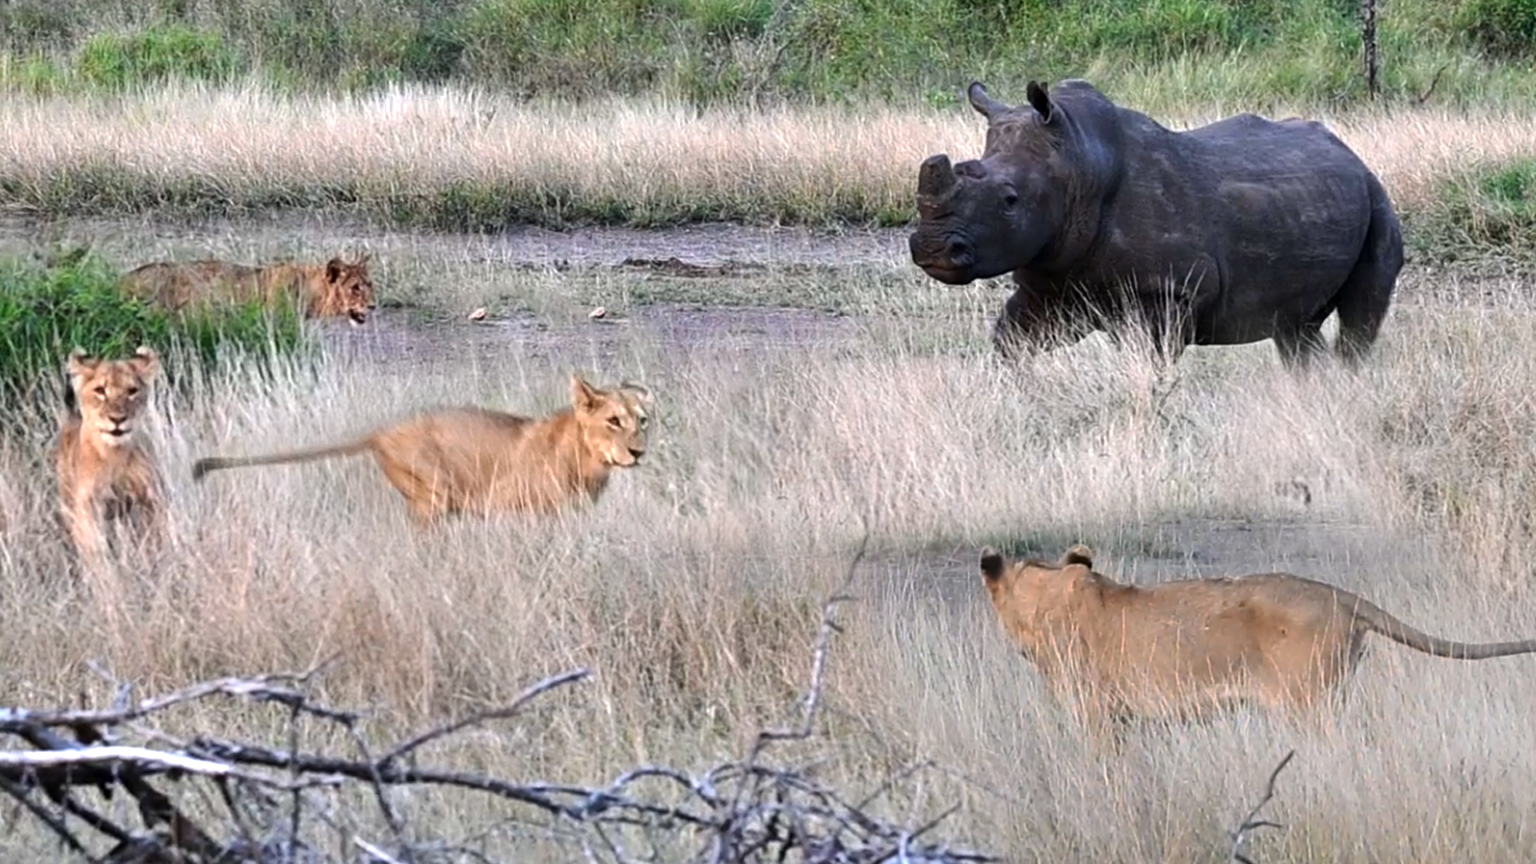 Rhino Charges at Pride of Lions with Cubs